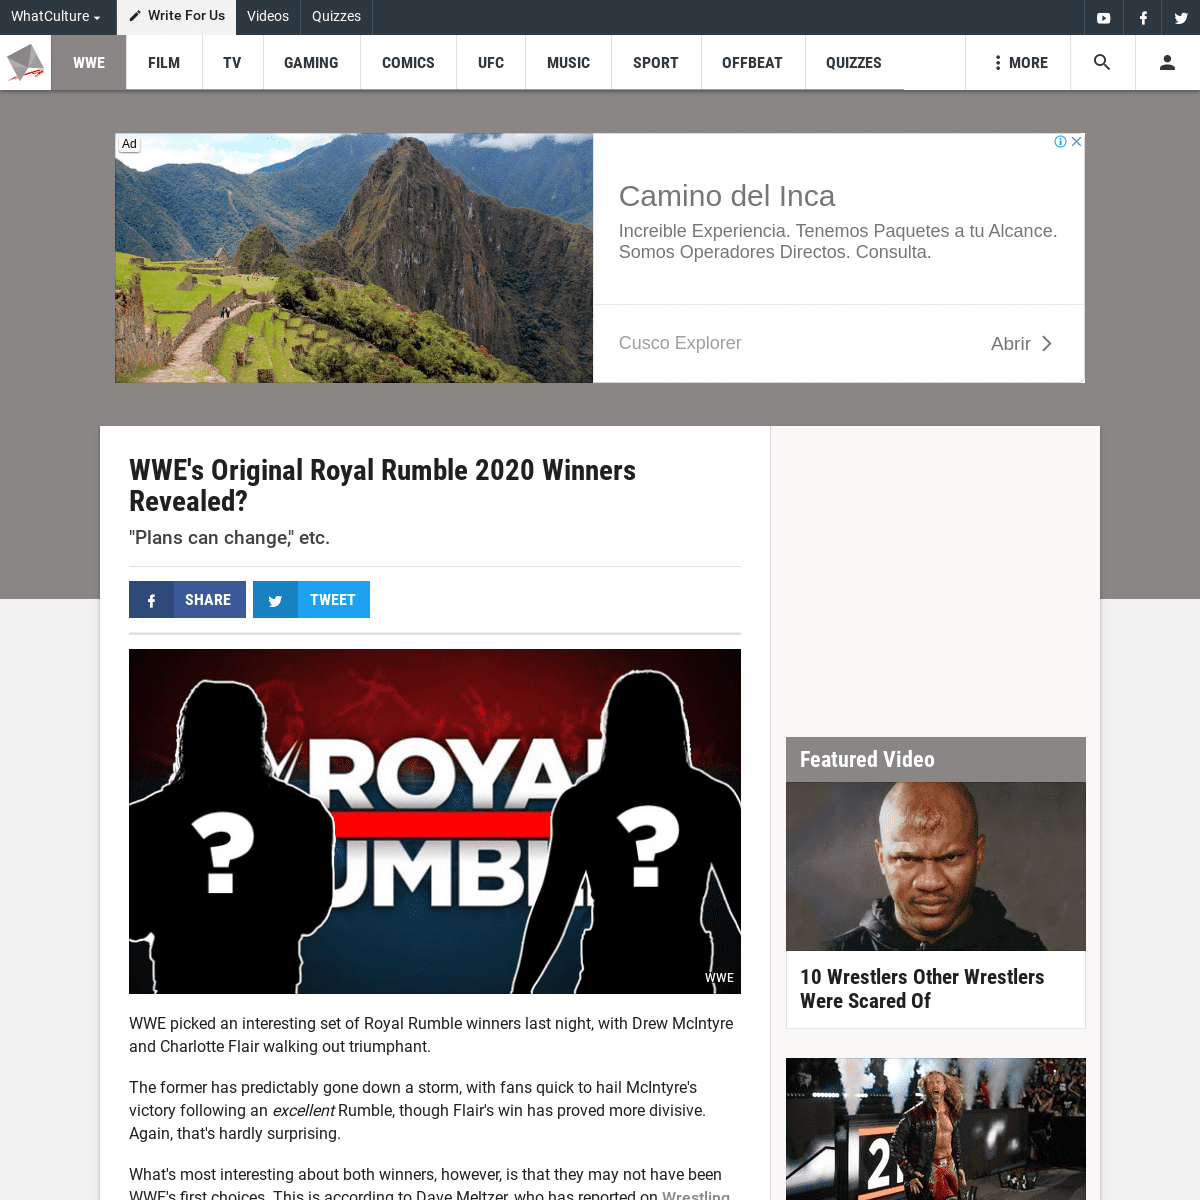 A complete backup of whatculture.com/wwe/wwes-original-royal-rumble-2020-winners-revealed